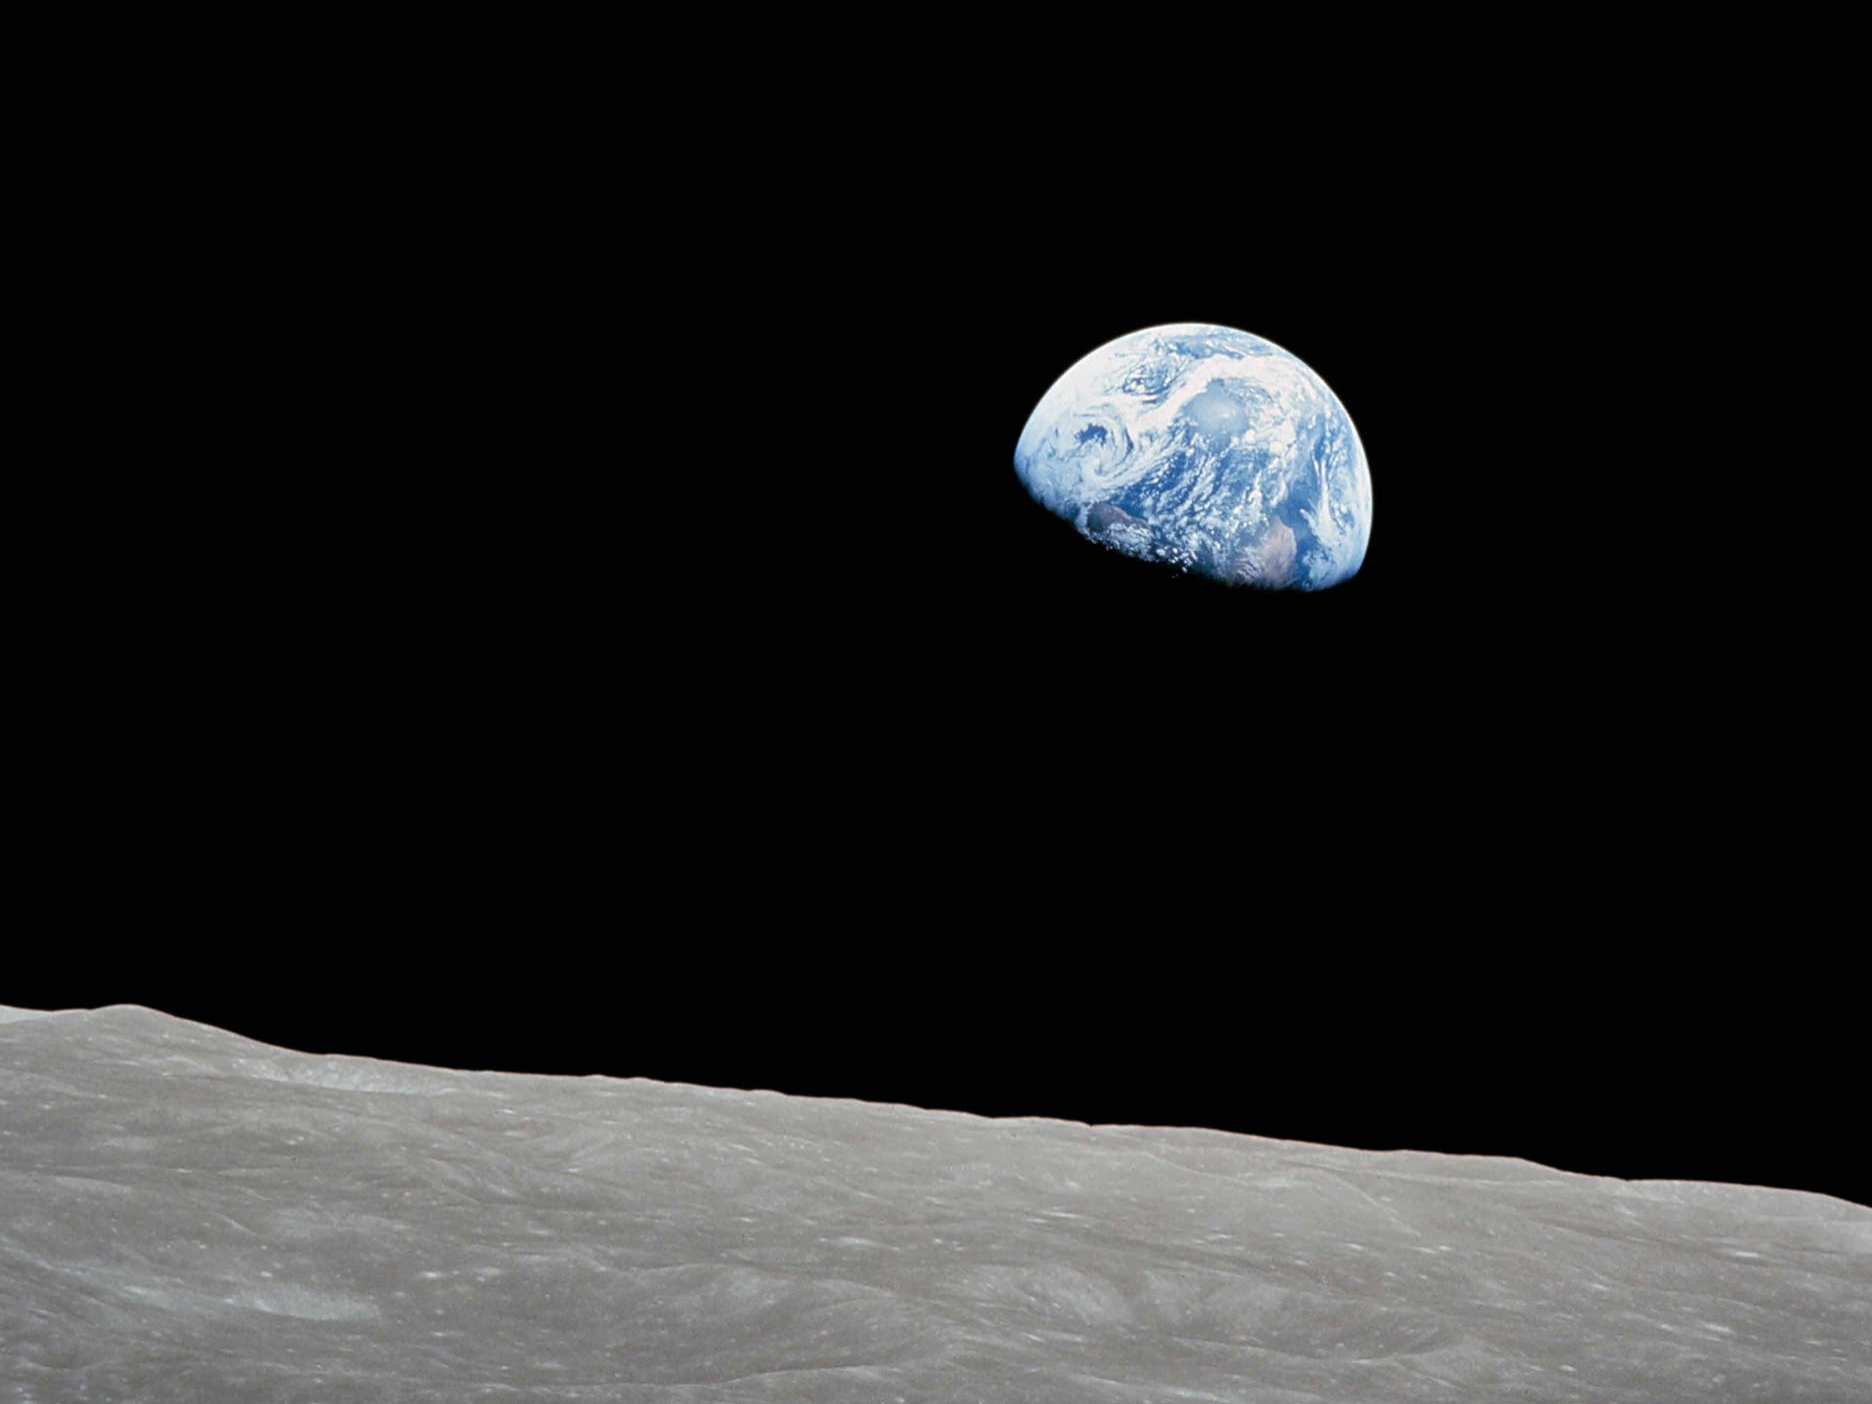 Perspective of standing on the moon surface and looking towards the earth.